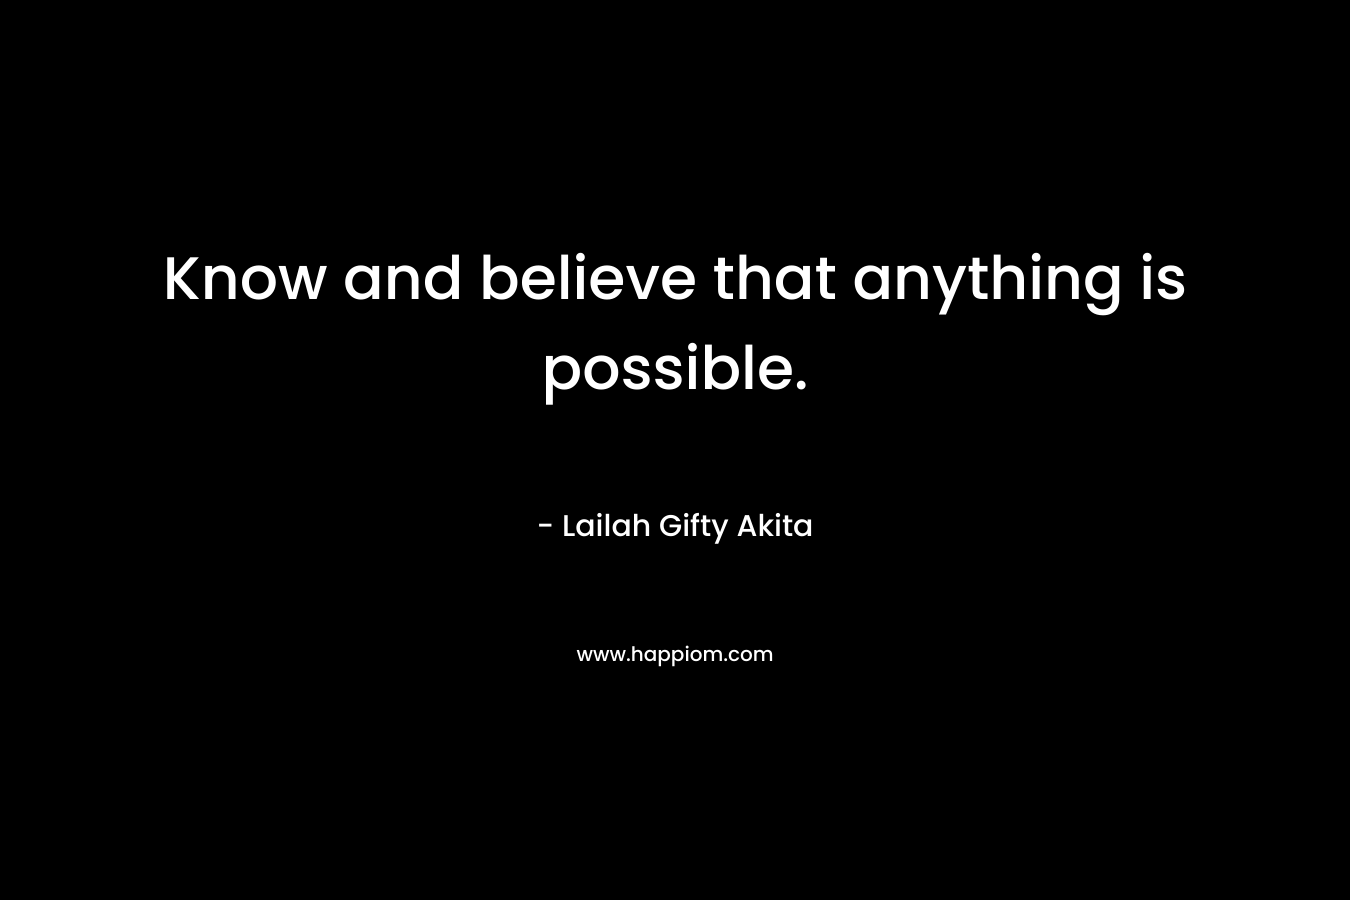 Know and believe that anything is possible.